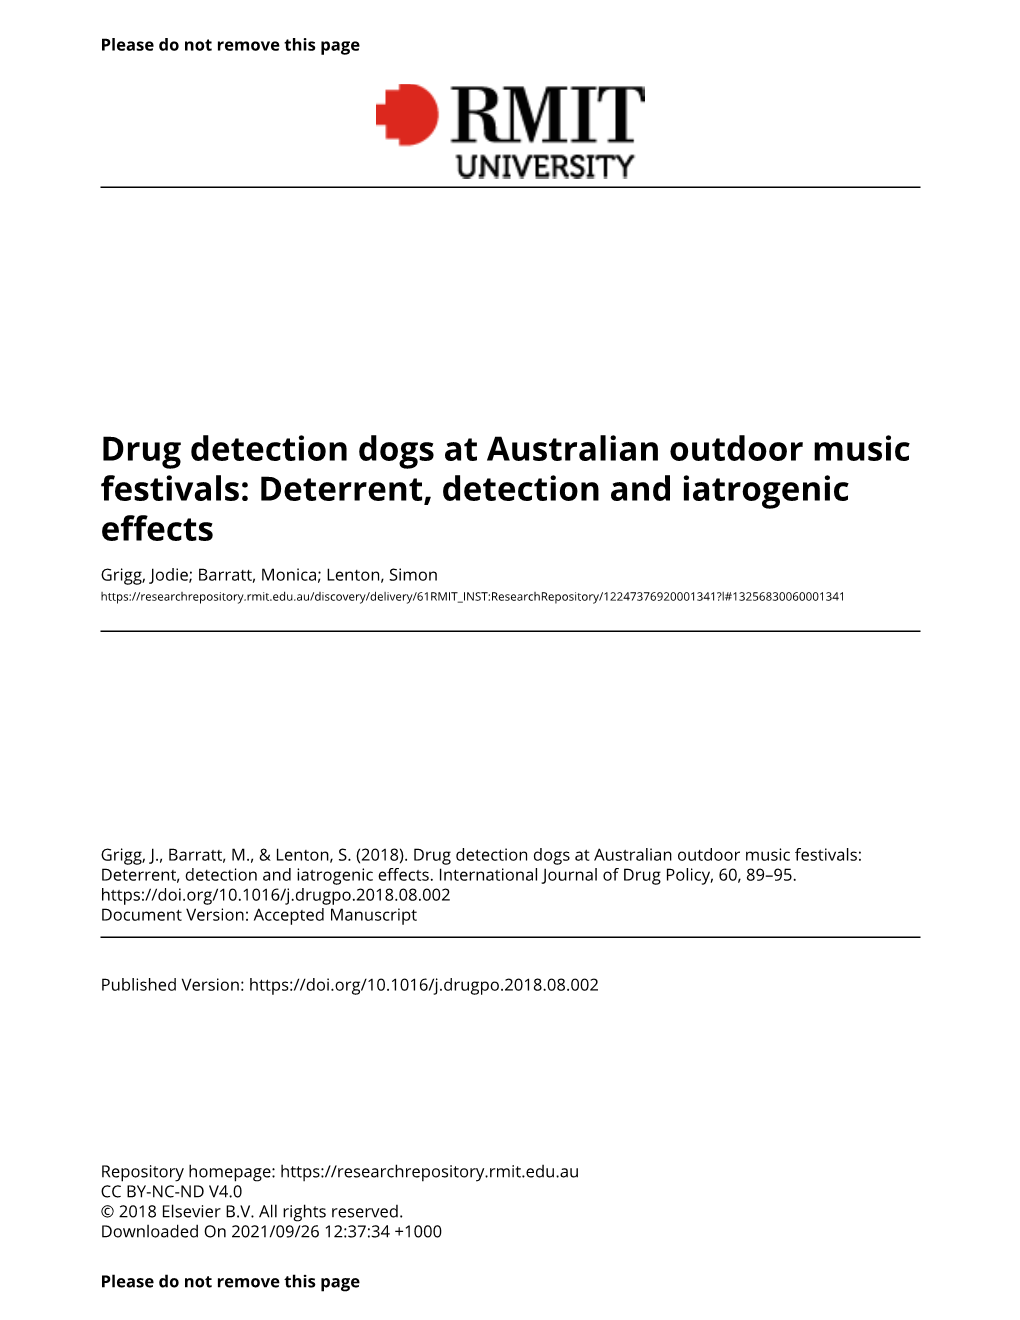 Drug Detection Dogs at Australian Outdoor Music Festivals: Deterrent, Detection and Iatrogenic Effects